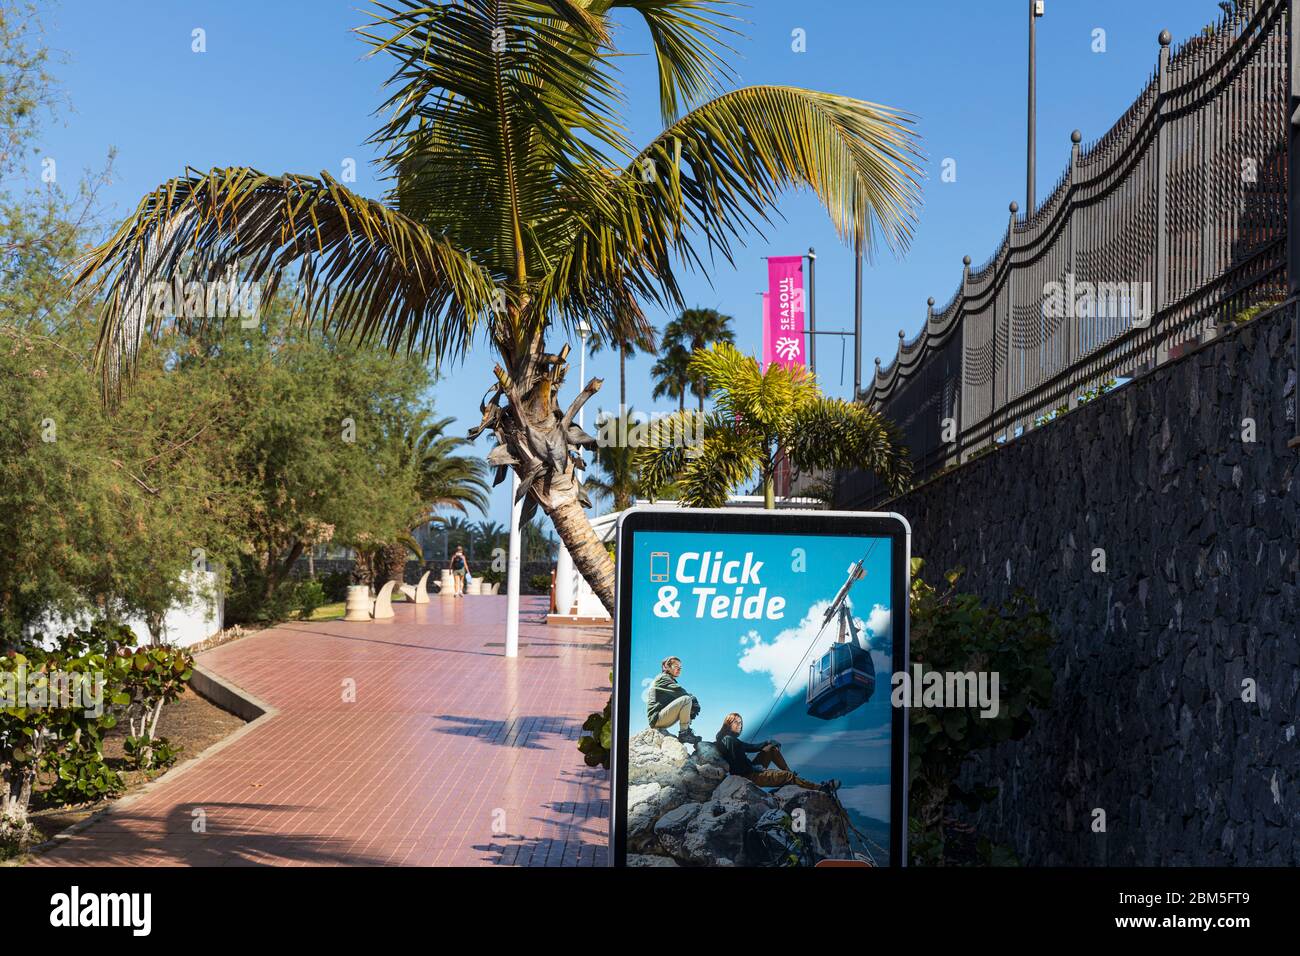 Poster advertising trips on the cable car to the top of Teide volcano on the promenade in Playa fanabe during the Covid 19 State of Emergency in Costa Stock Photo